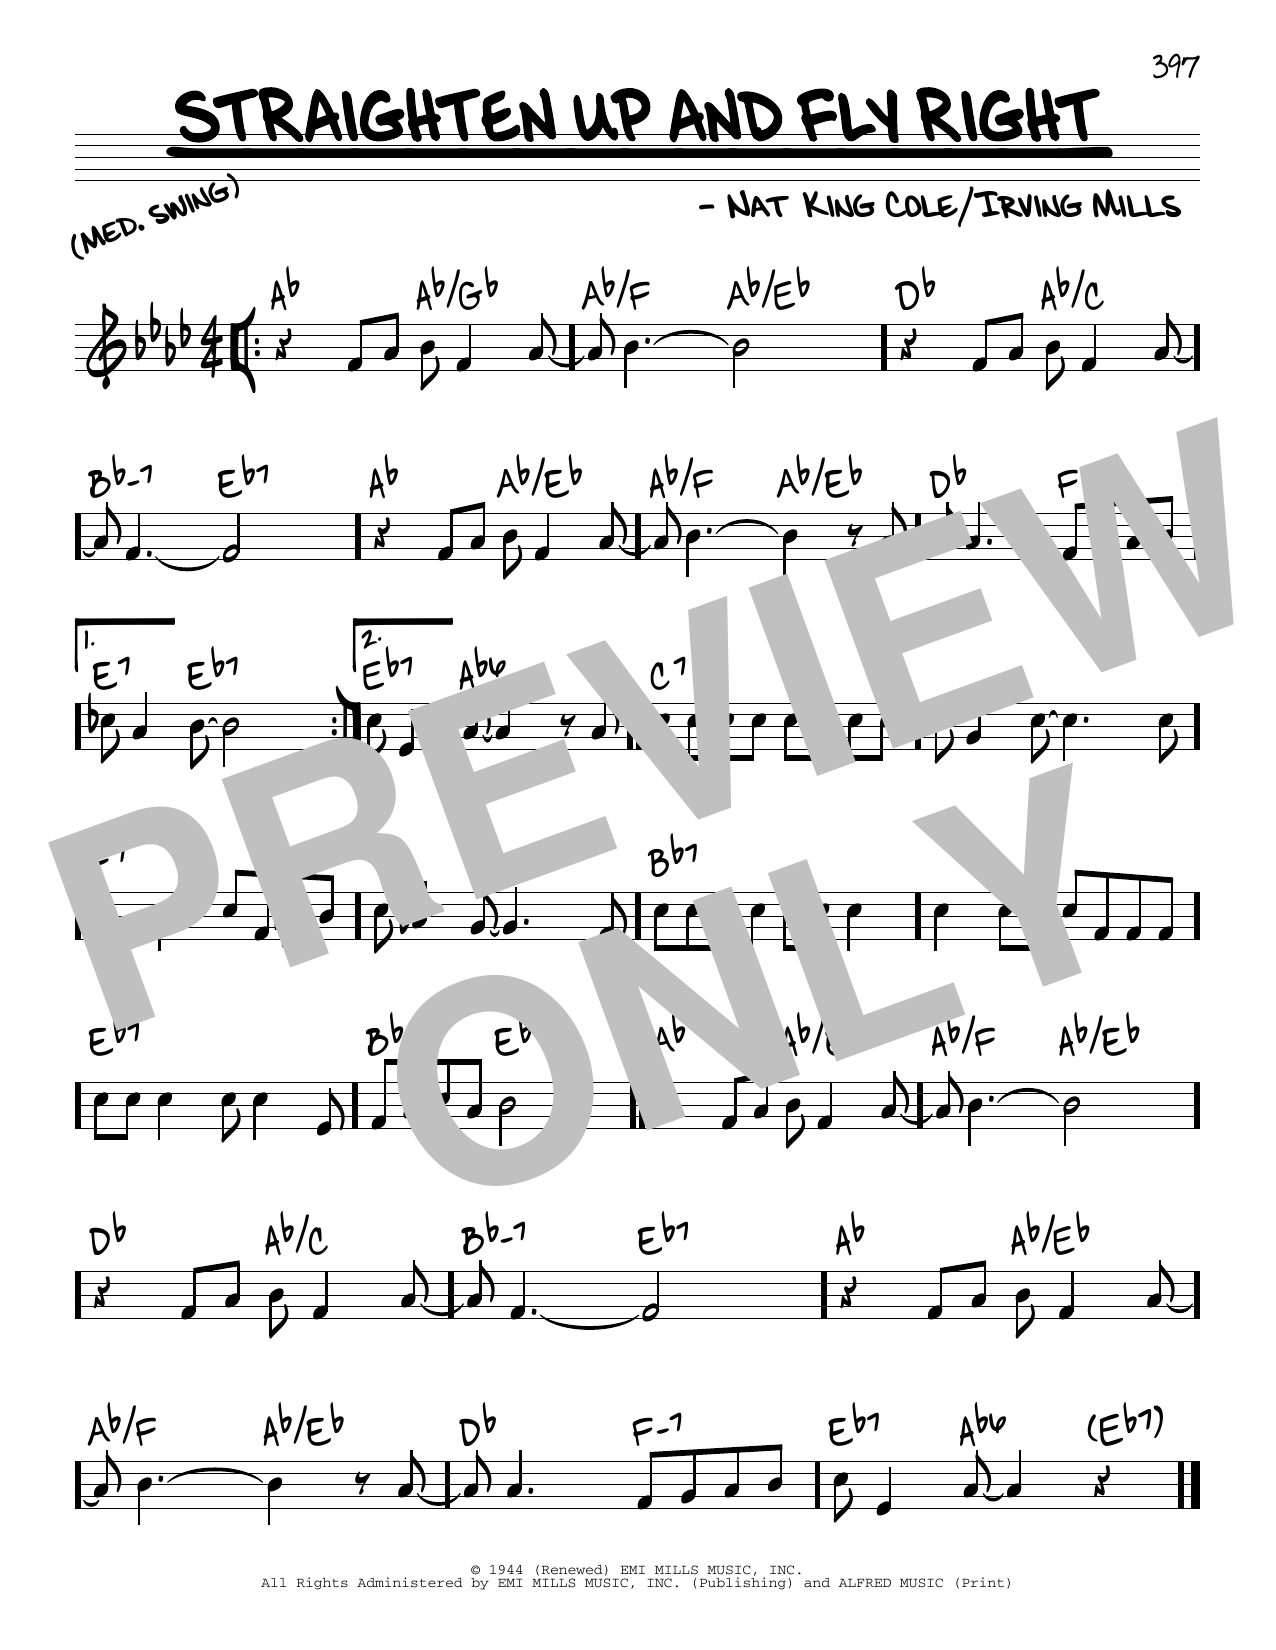 Download Nat King Cole Straighten Up And Fly Right Sheet Music